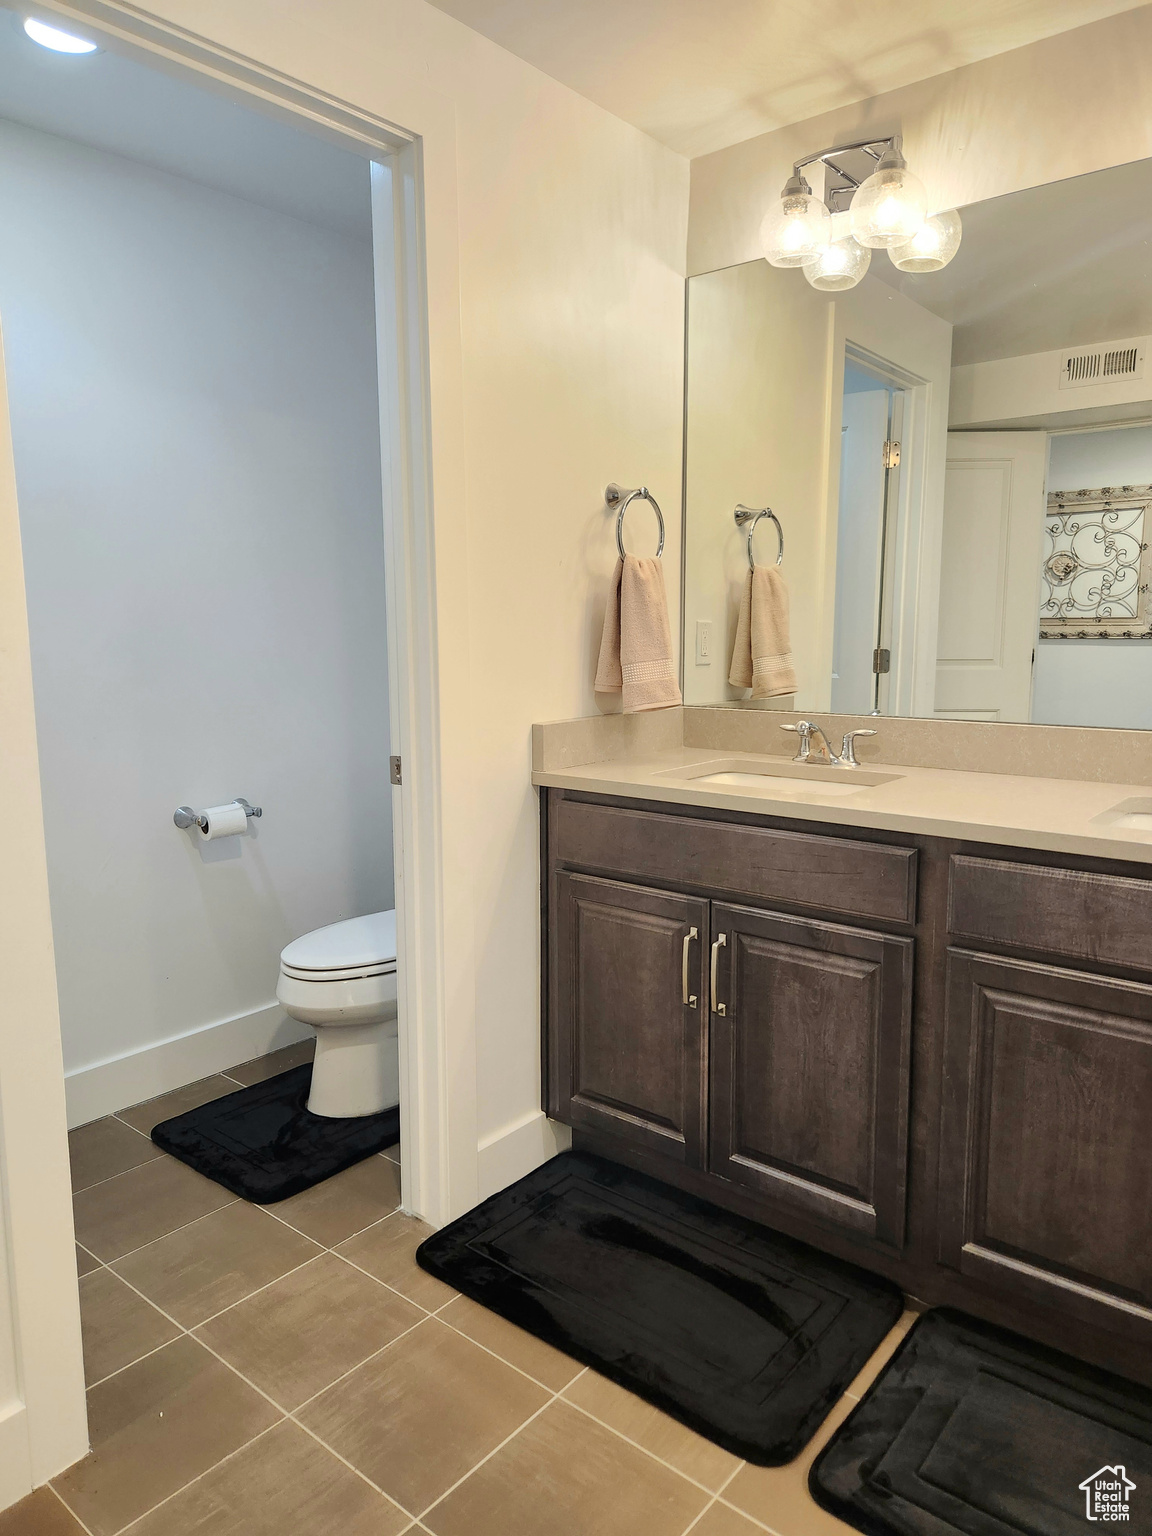 Bathroom featuring vanity, an inviting chandelier, toilet, and tile flooring